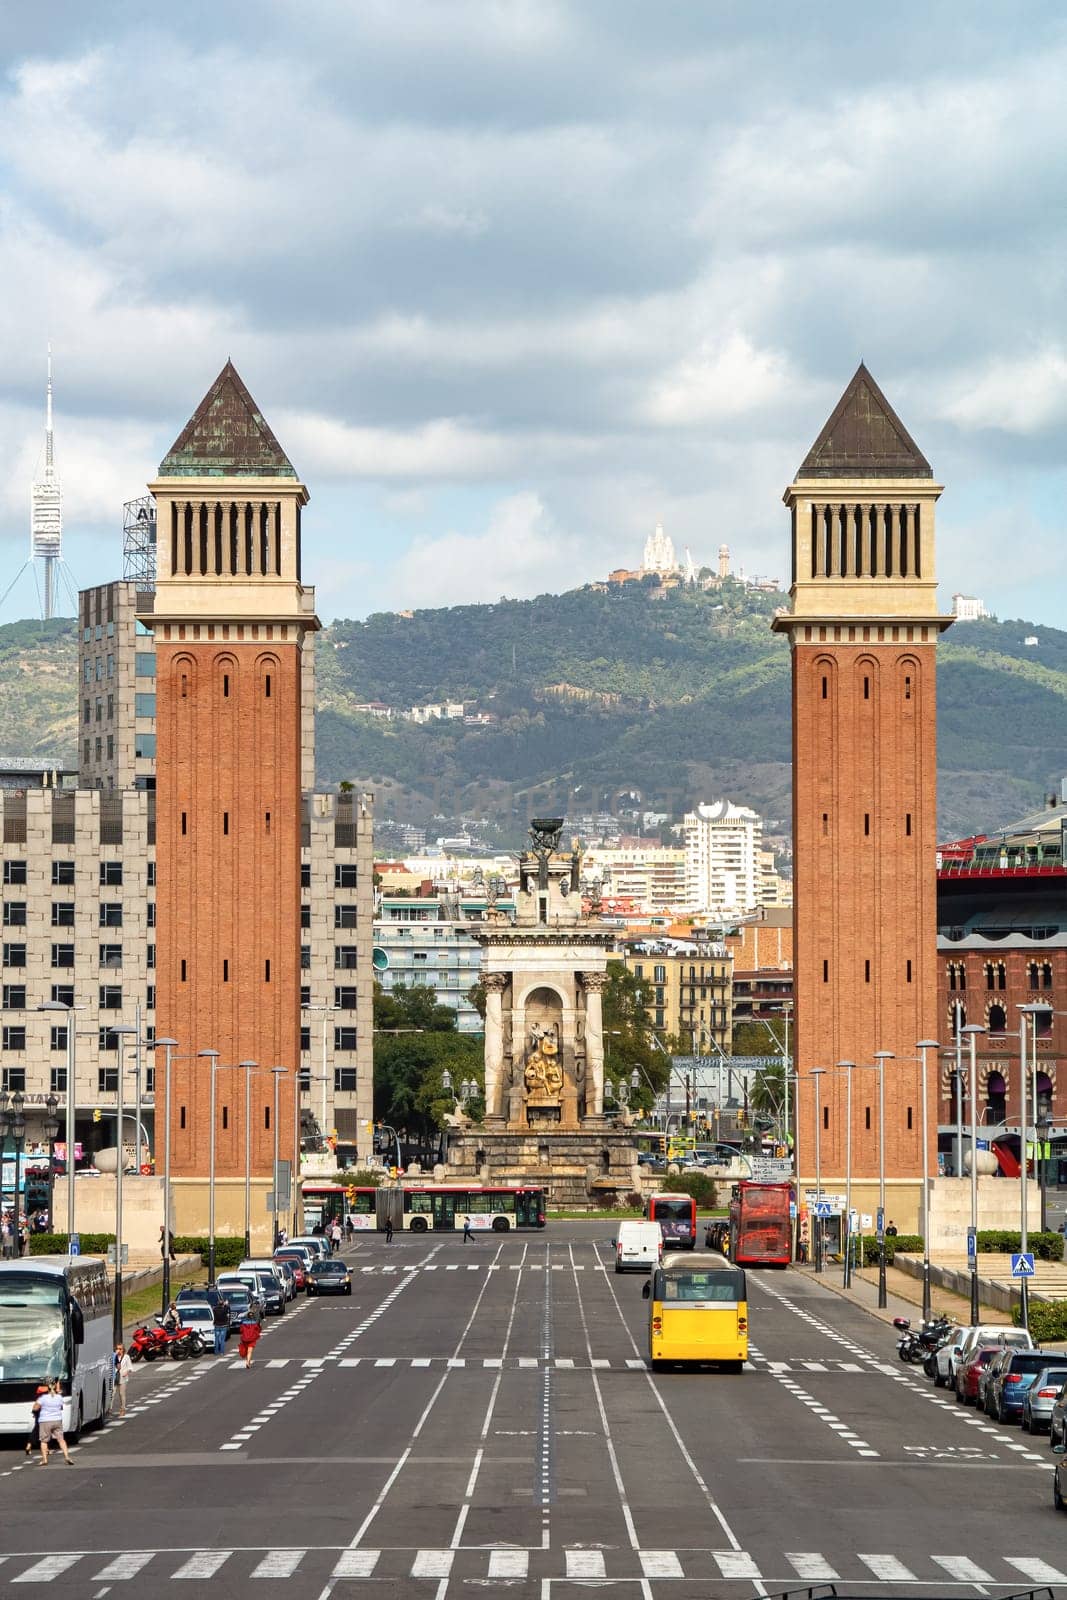 Venetian Towers on Square of Spain in Barcelona. Spain. Plaza de Espana. View to the road, towers, mountain, Tibidabo